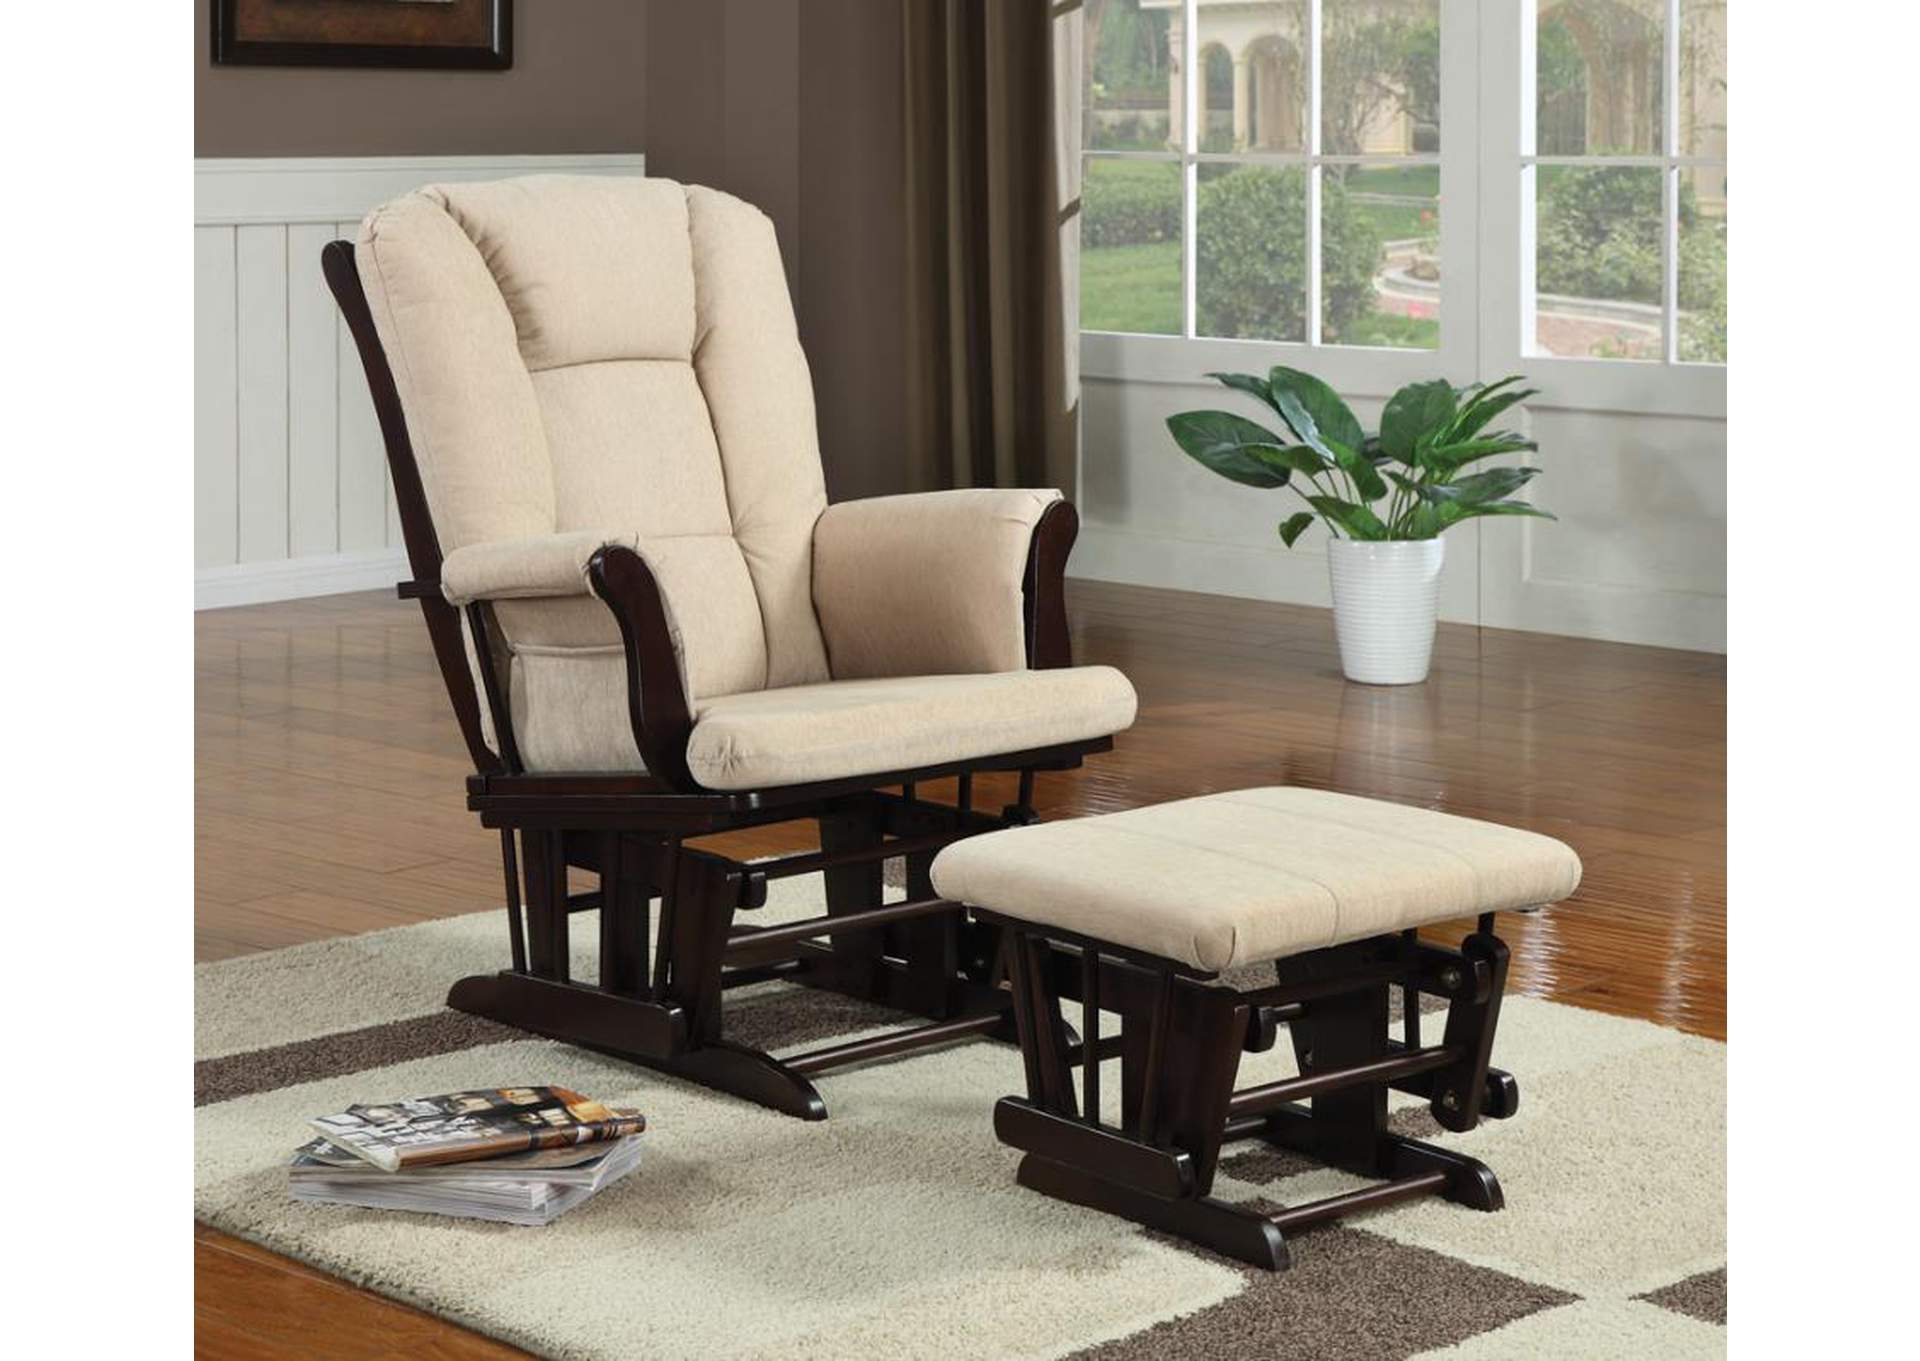 Midge Upholstered Glider with Ottoman Beige and Espresso,Coaster Furniture